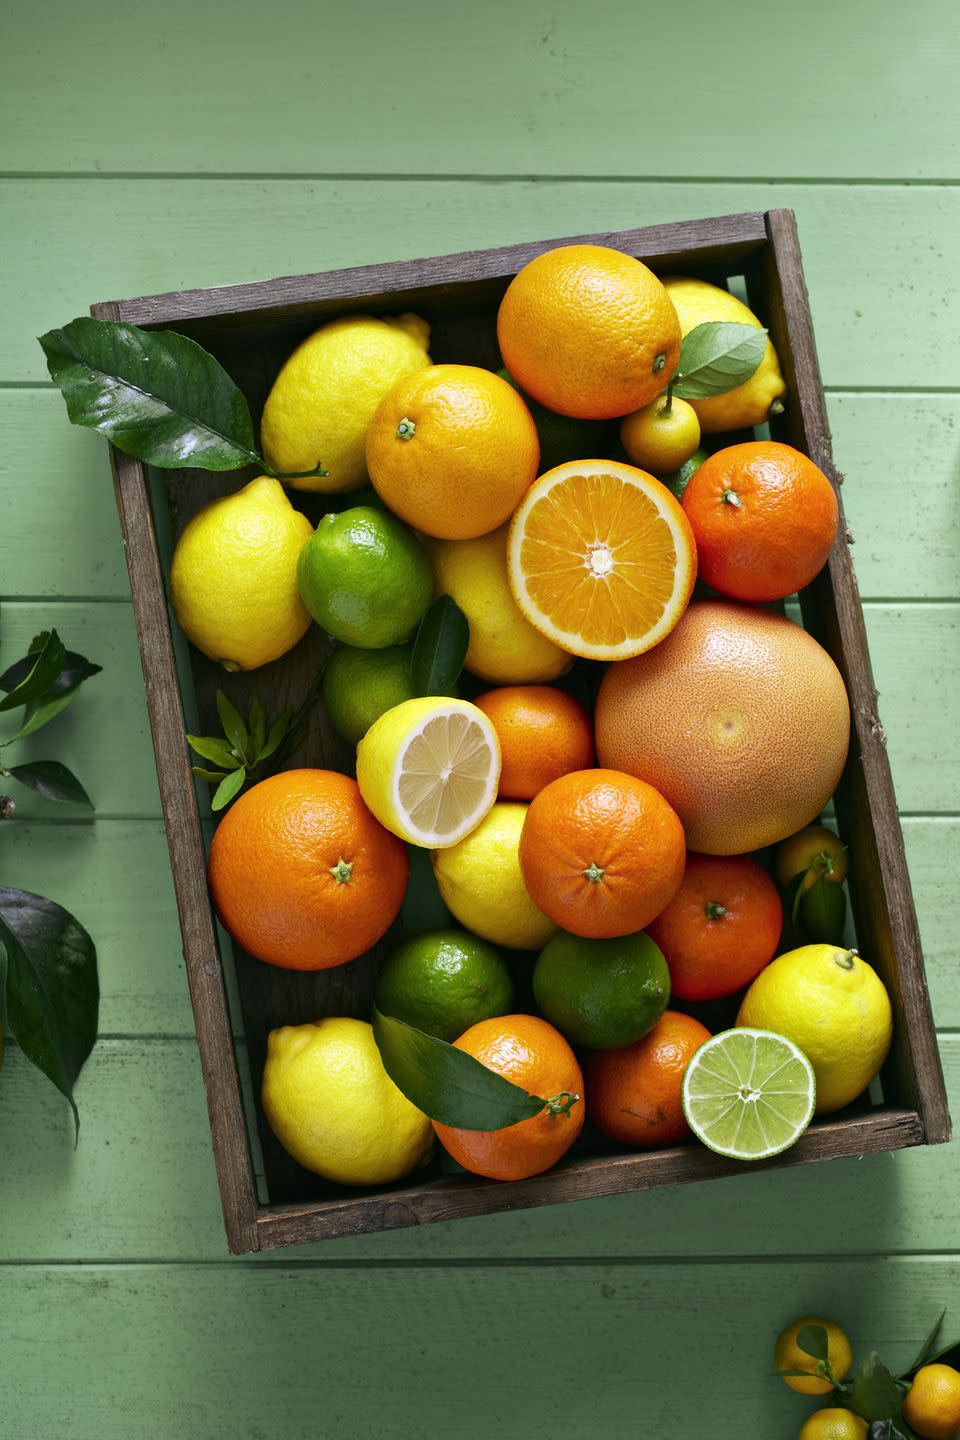 Add more citrus to your grocery cart.